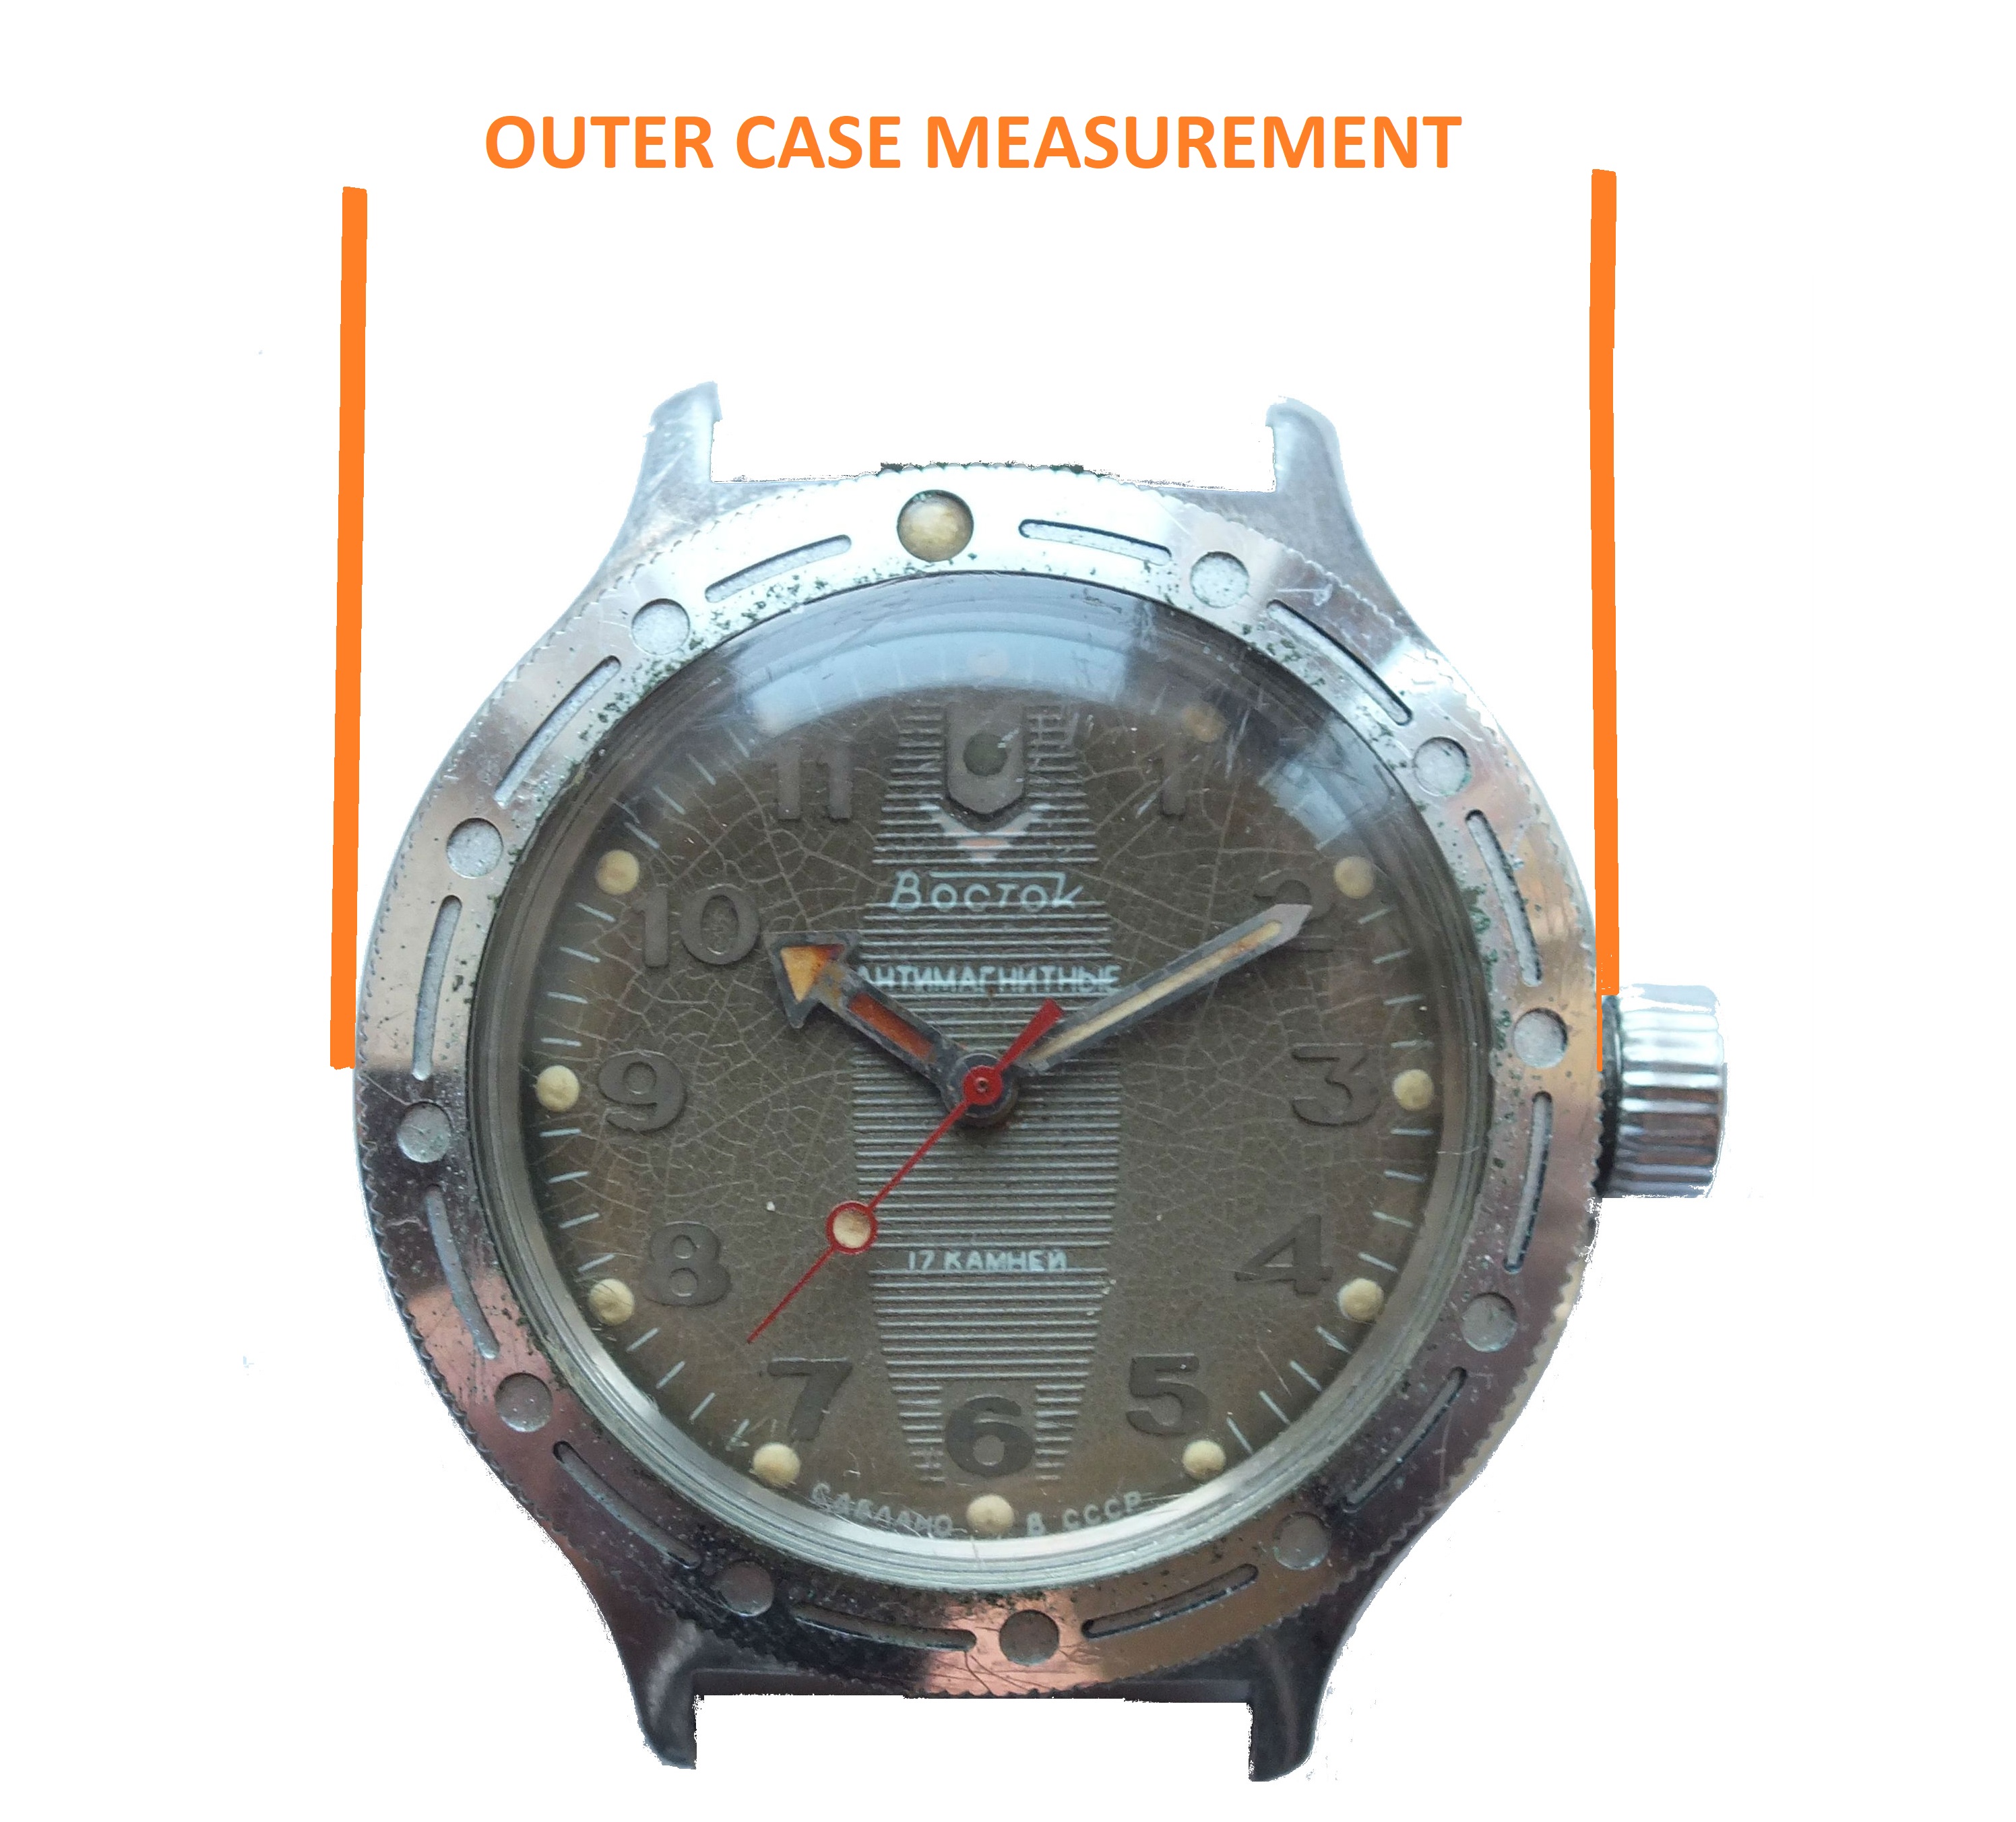 how to measure outercase of watch